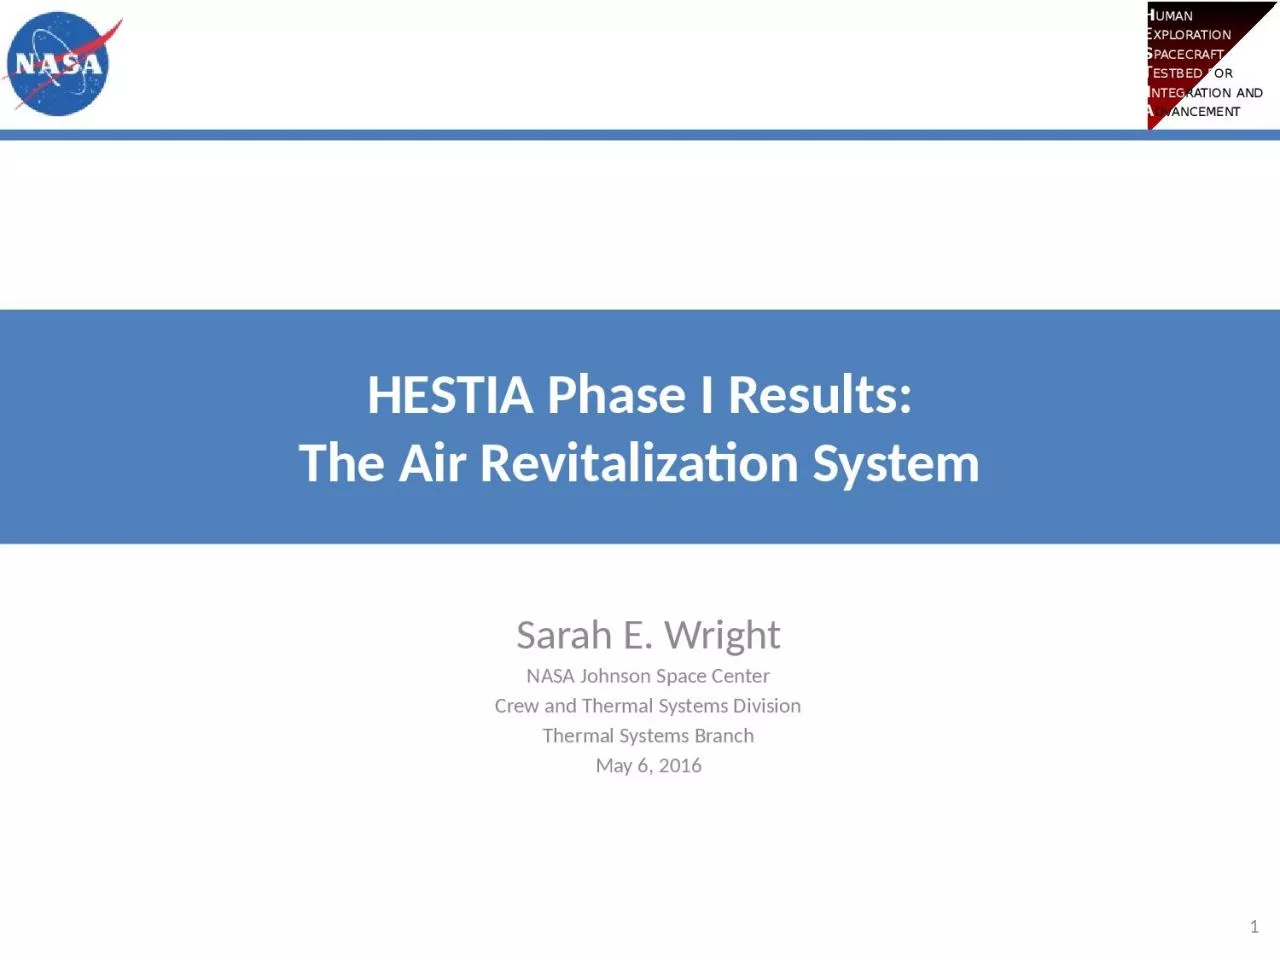 HESTIA Phase I Results: The Air Revitalization System